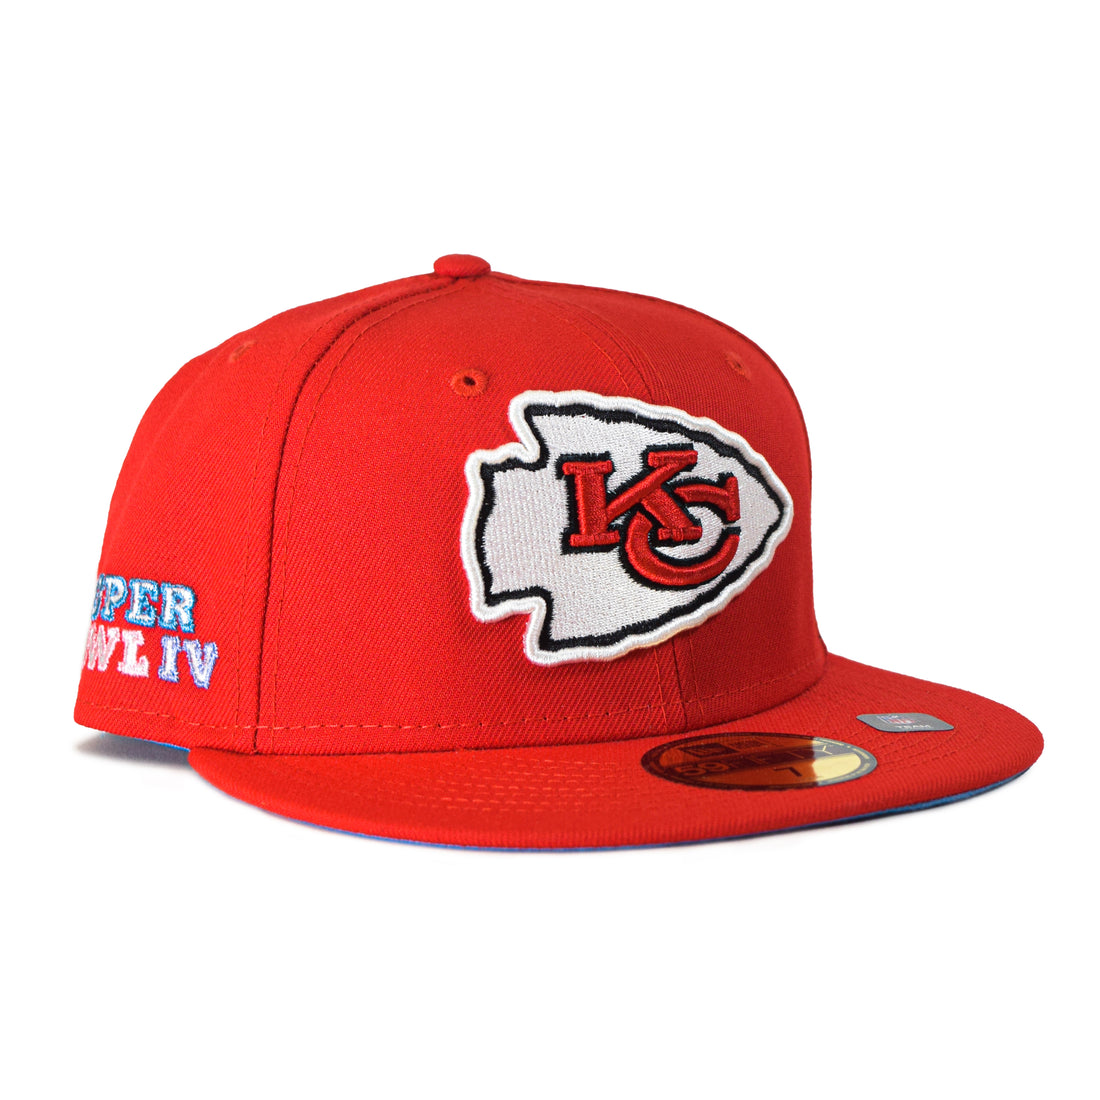 New Era Kansas City Chiefs "Pop Sweat" 59Fifty Fitted - Red